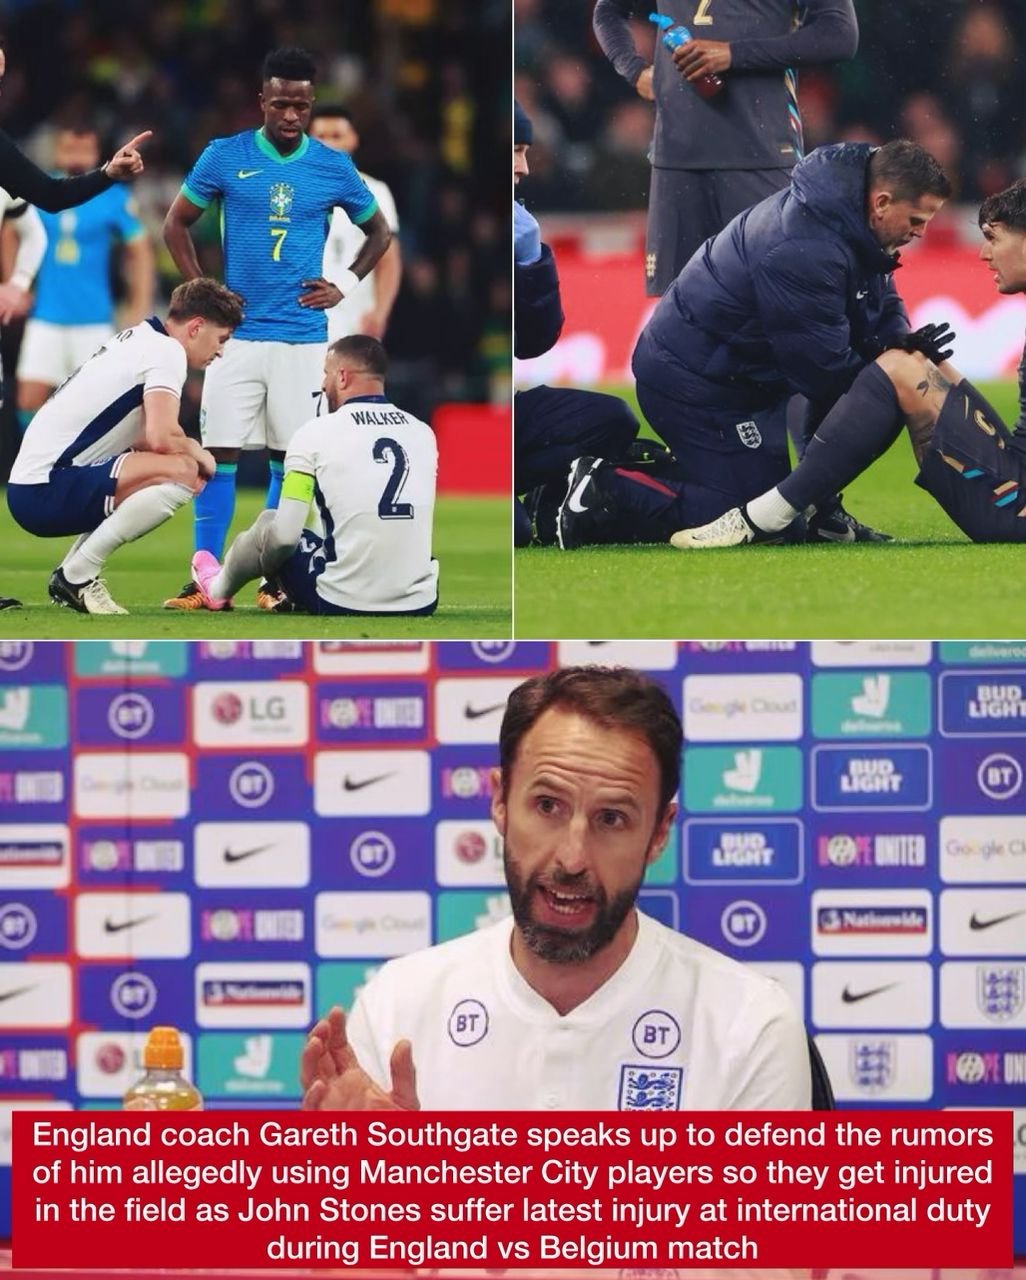 England coach Gareth Southgate speaks up to defend the rumors of him allegedly using Manchester City players so they got injured in the field as John Stones suffer an injury at international duty during England vs Belgium match